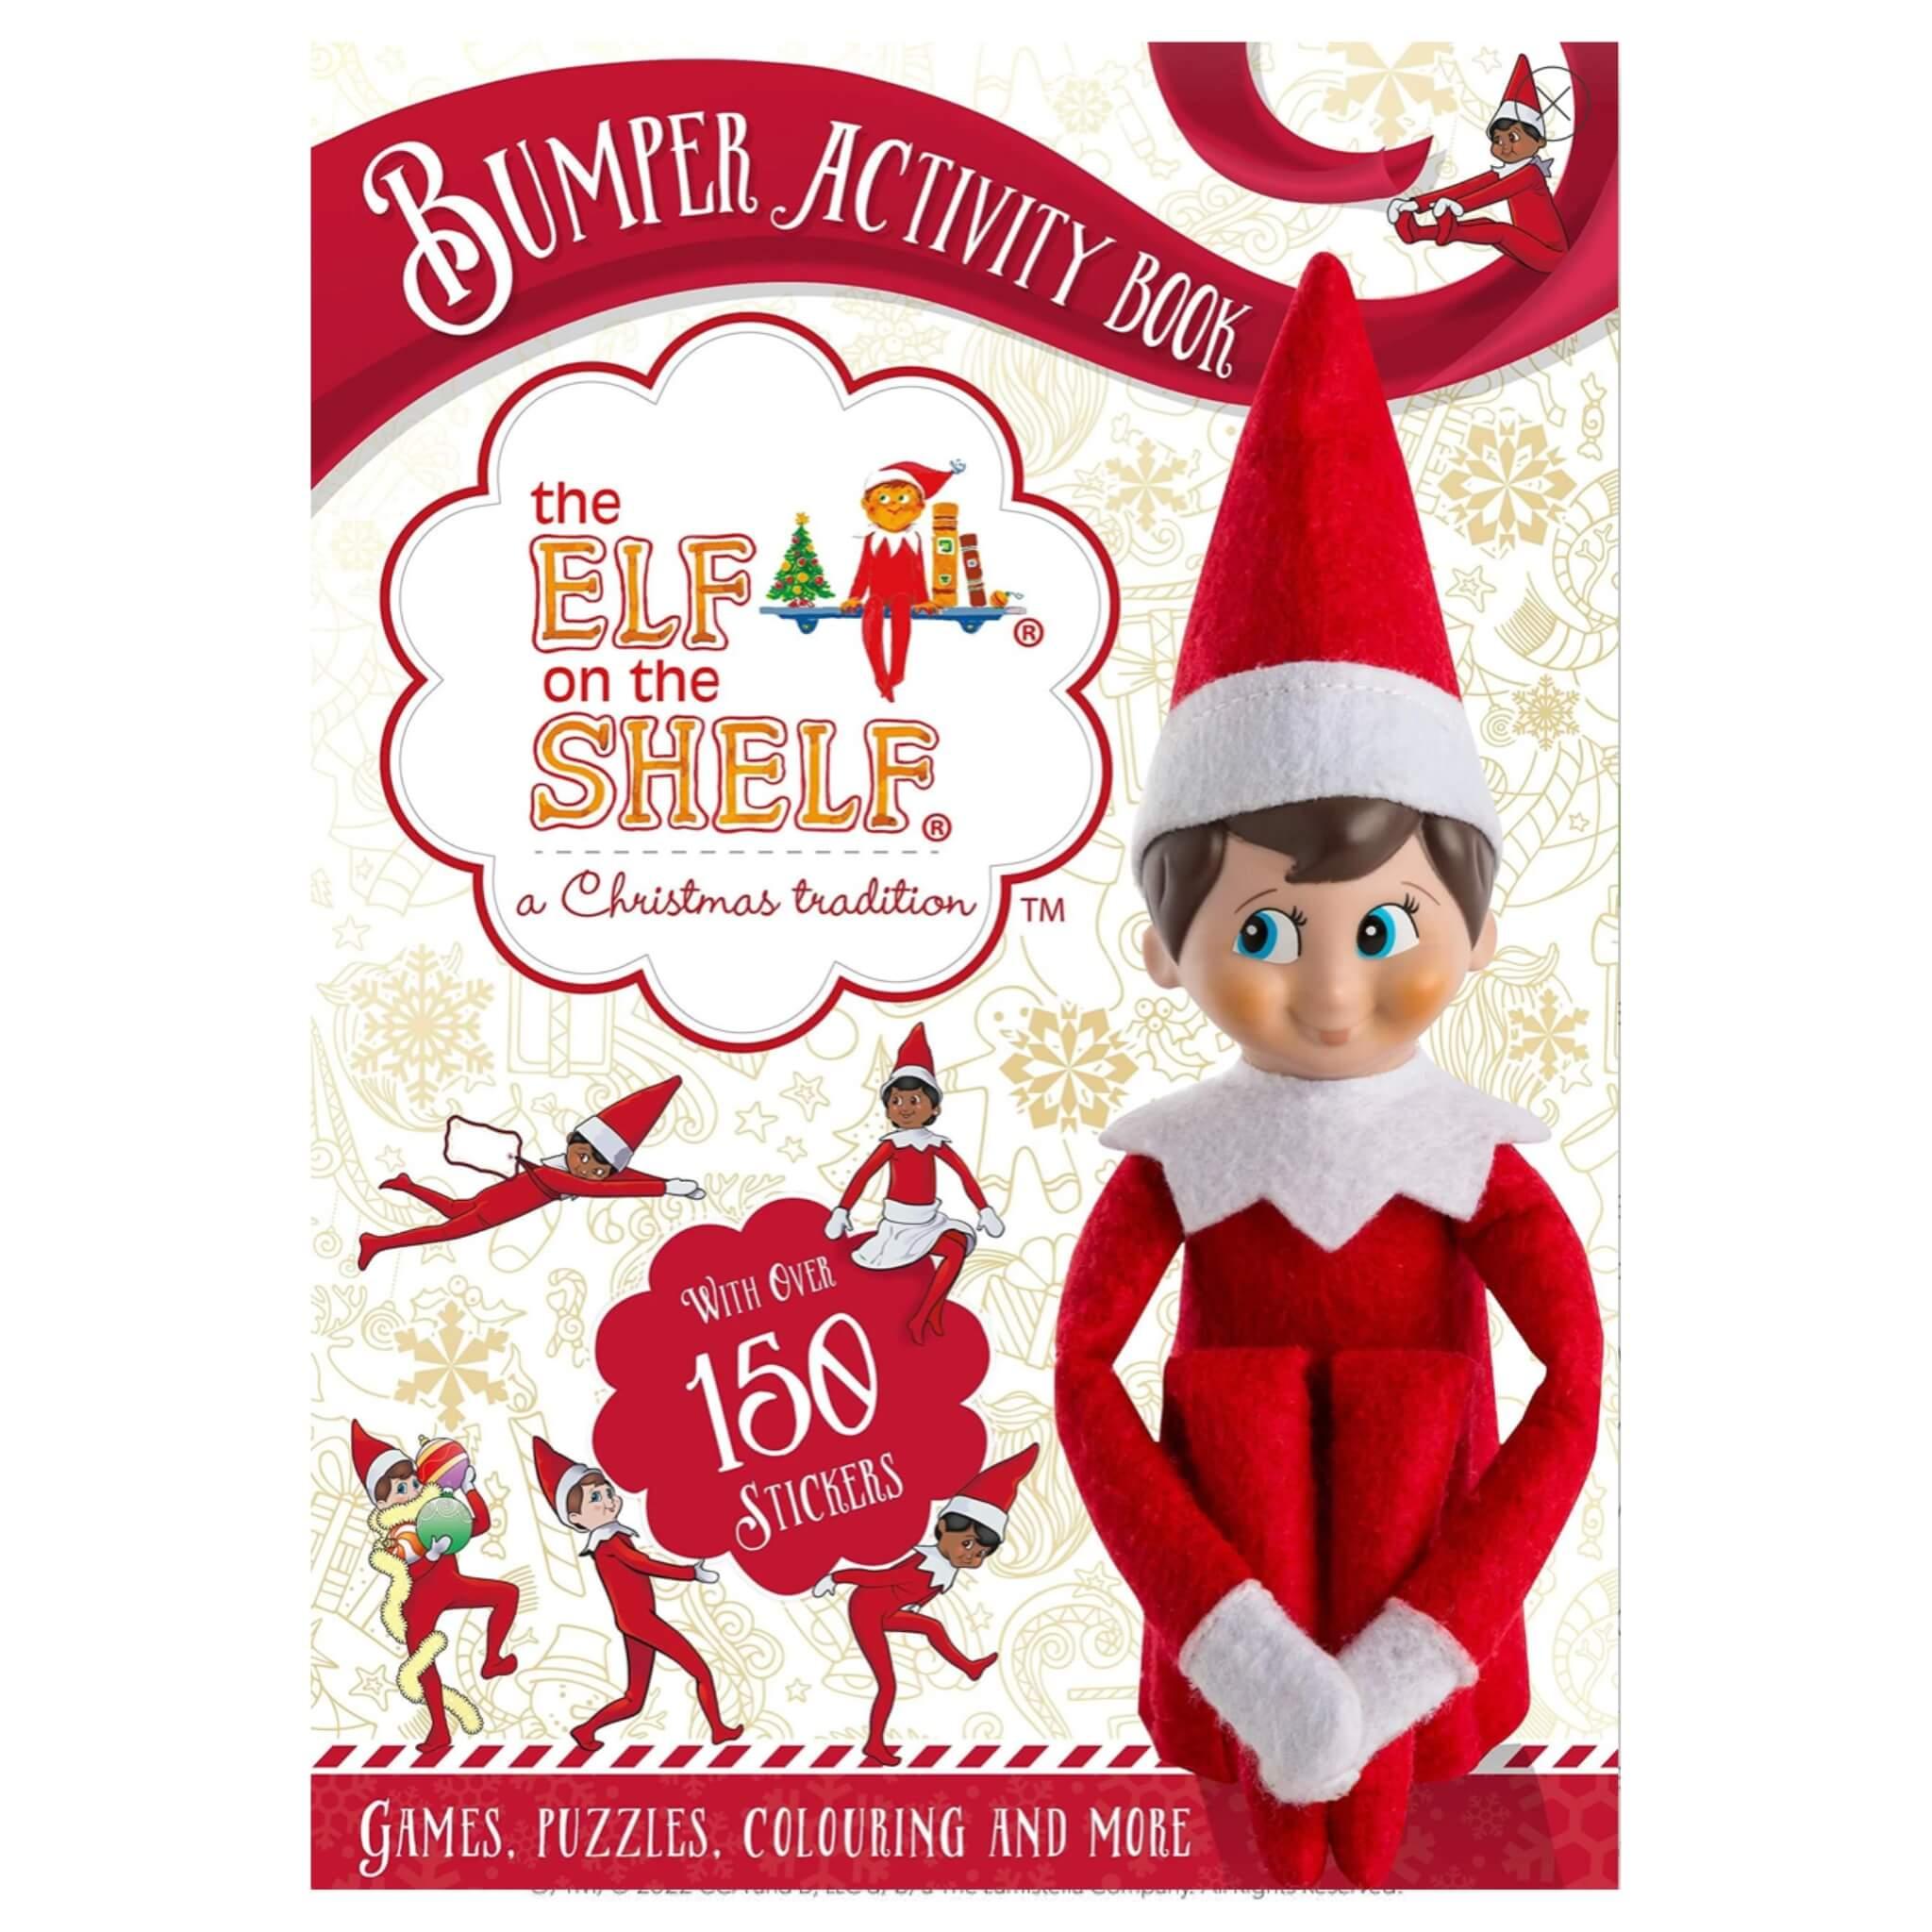 Free Gift - Bumper Activity Book - The Elf on The Shelf